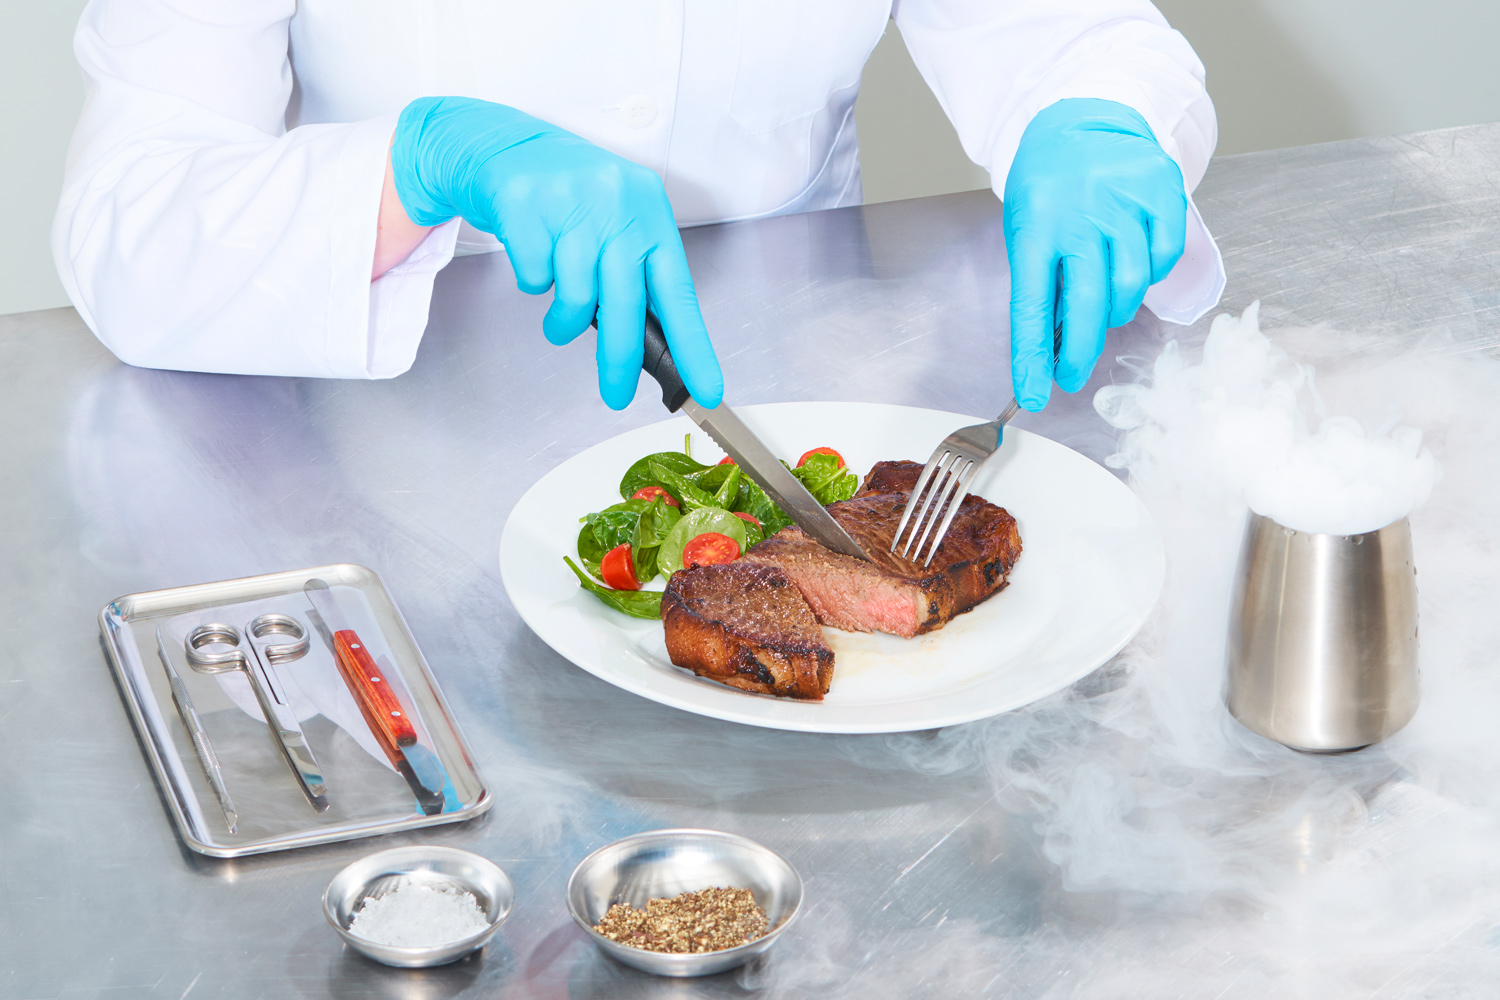 A photo of lab-grown meat on a plate